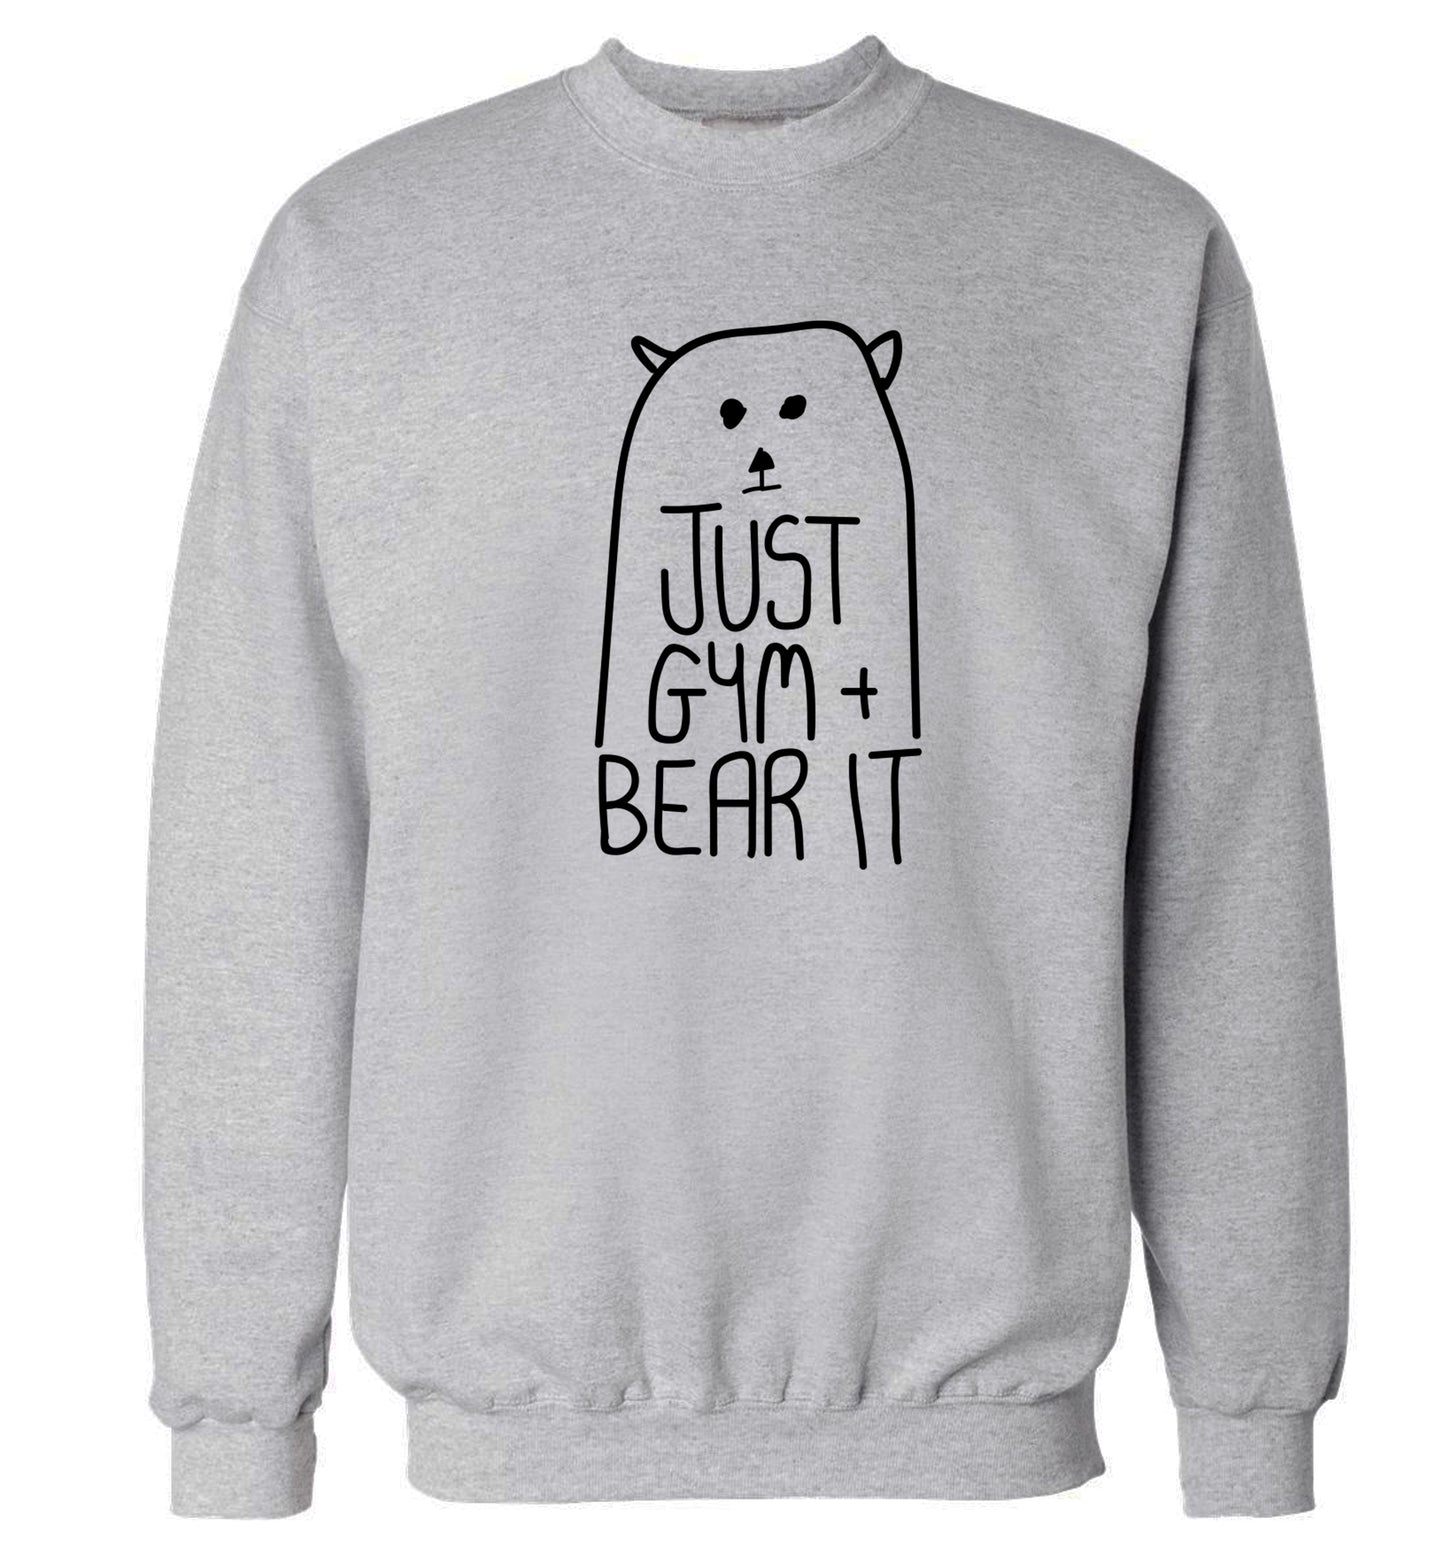 Just gym and bear it Adult's unisex grey Sweater 2XL